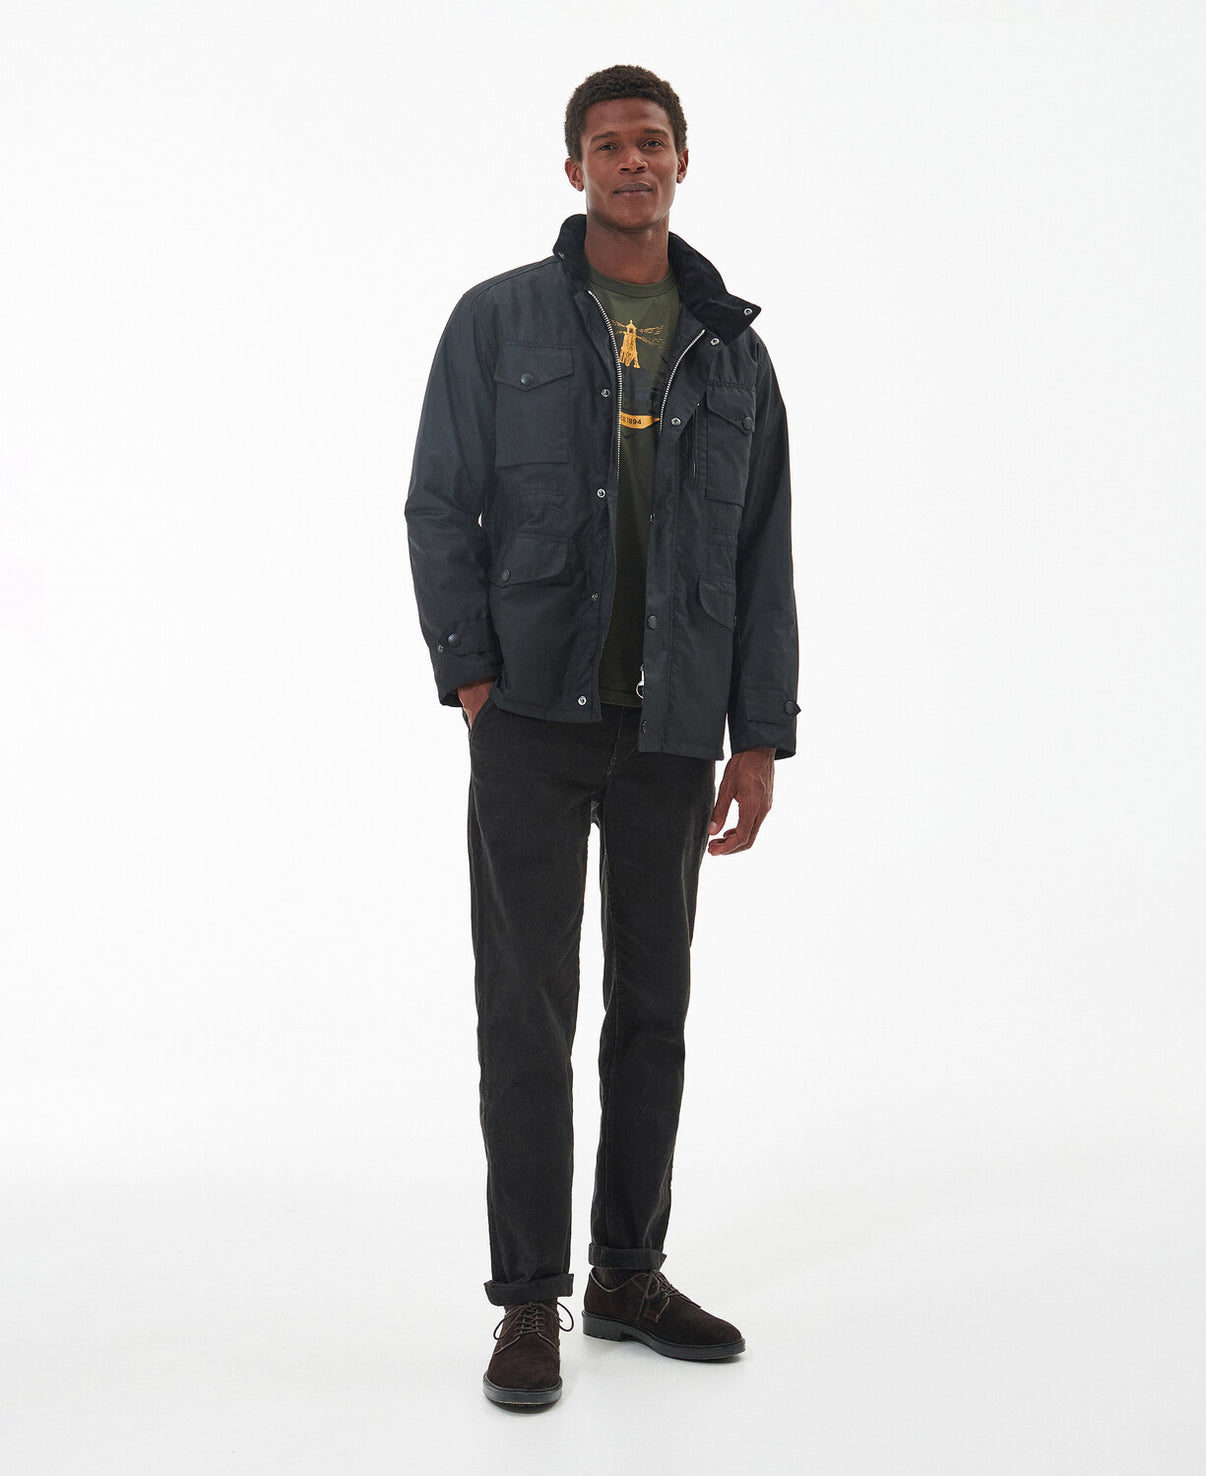 Barbour Sapper Waxed Jacket | Barbour Waxed Jackets – Sam Turner & Sons